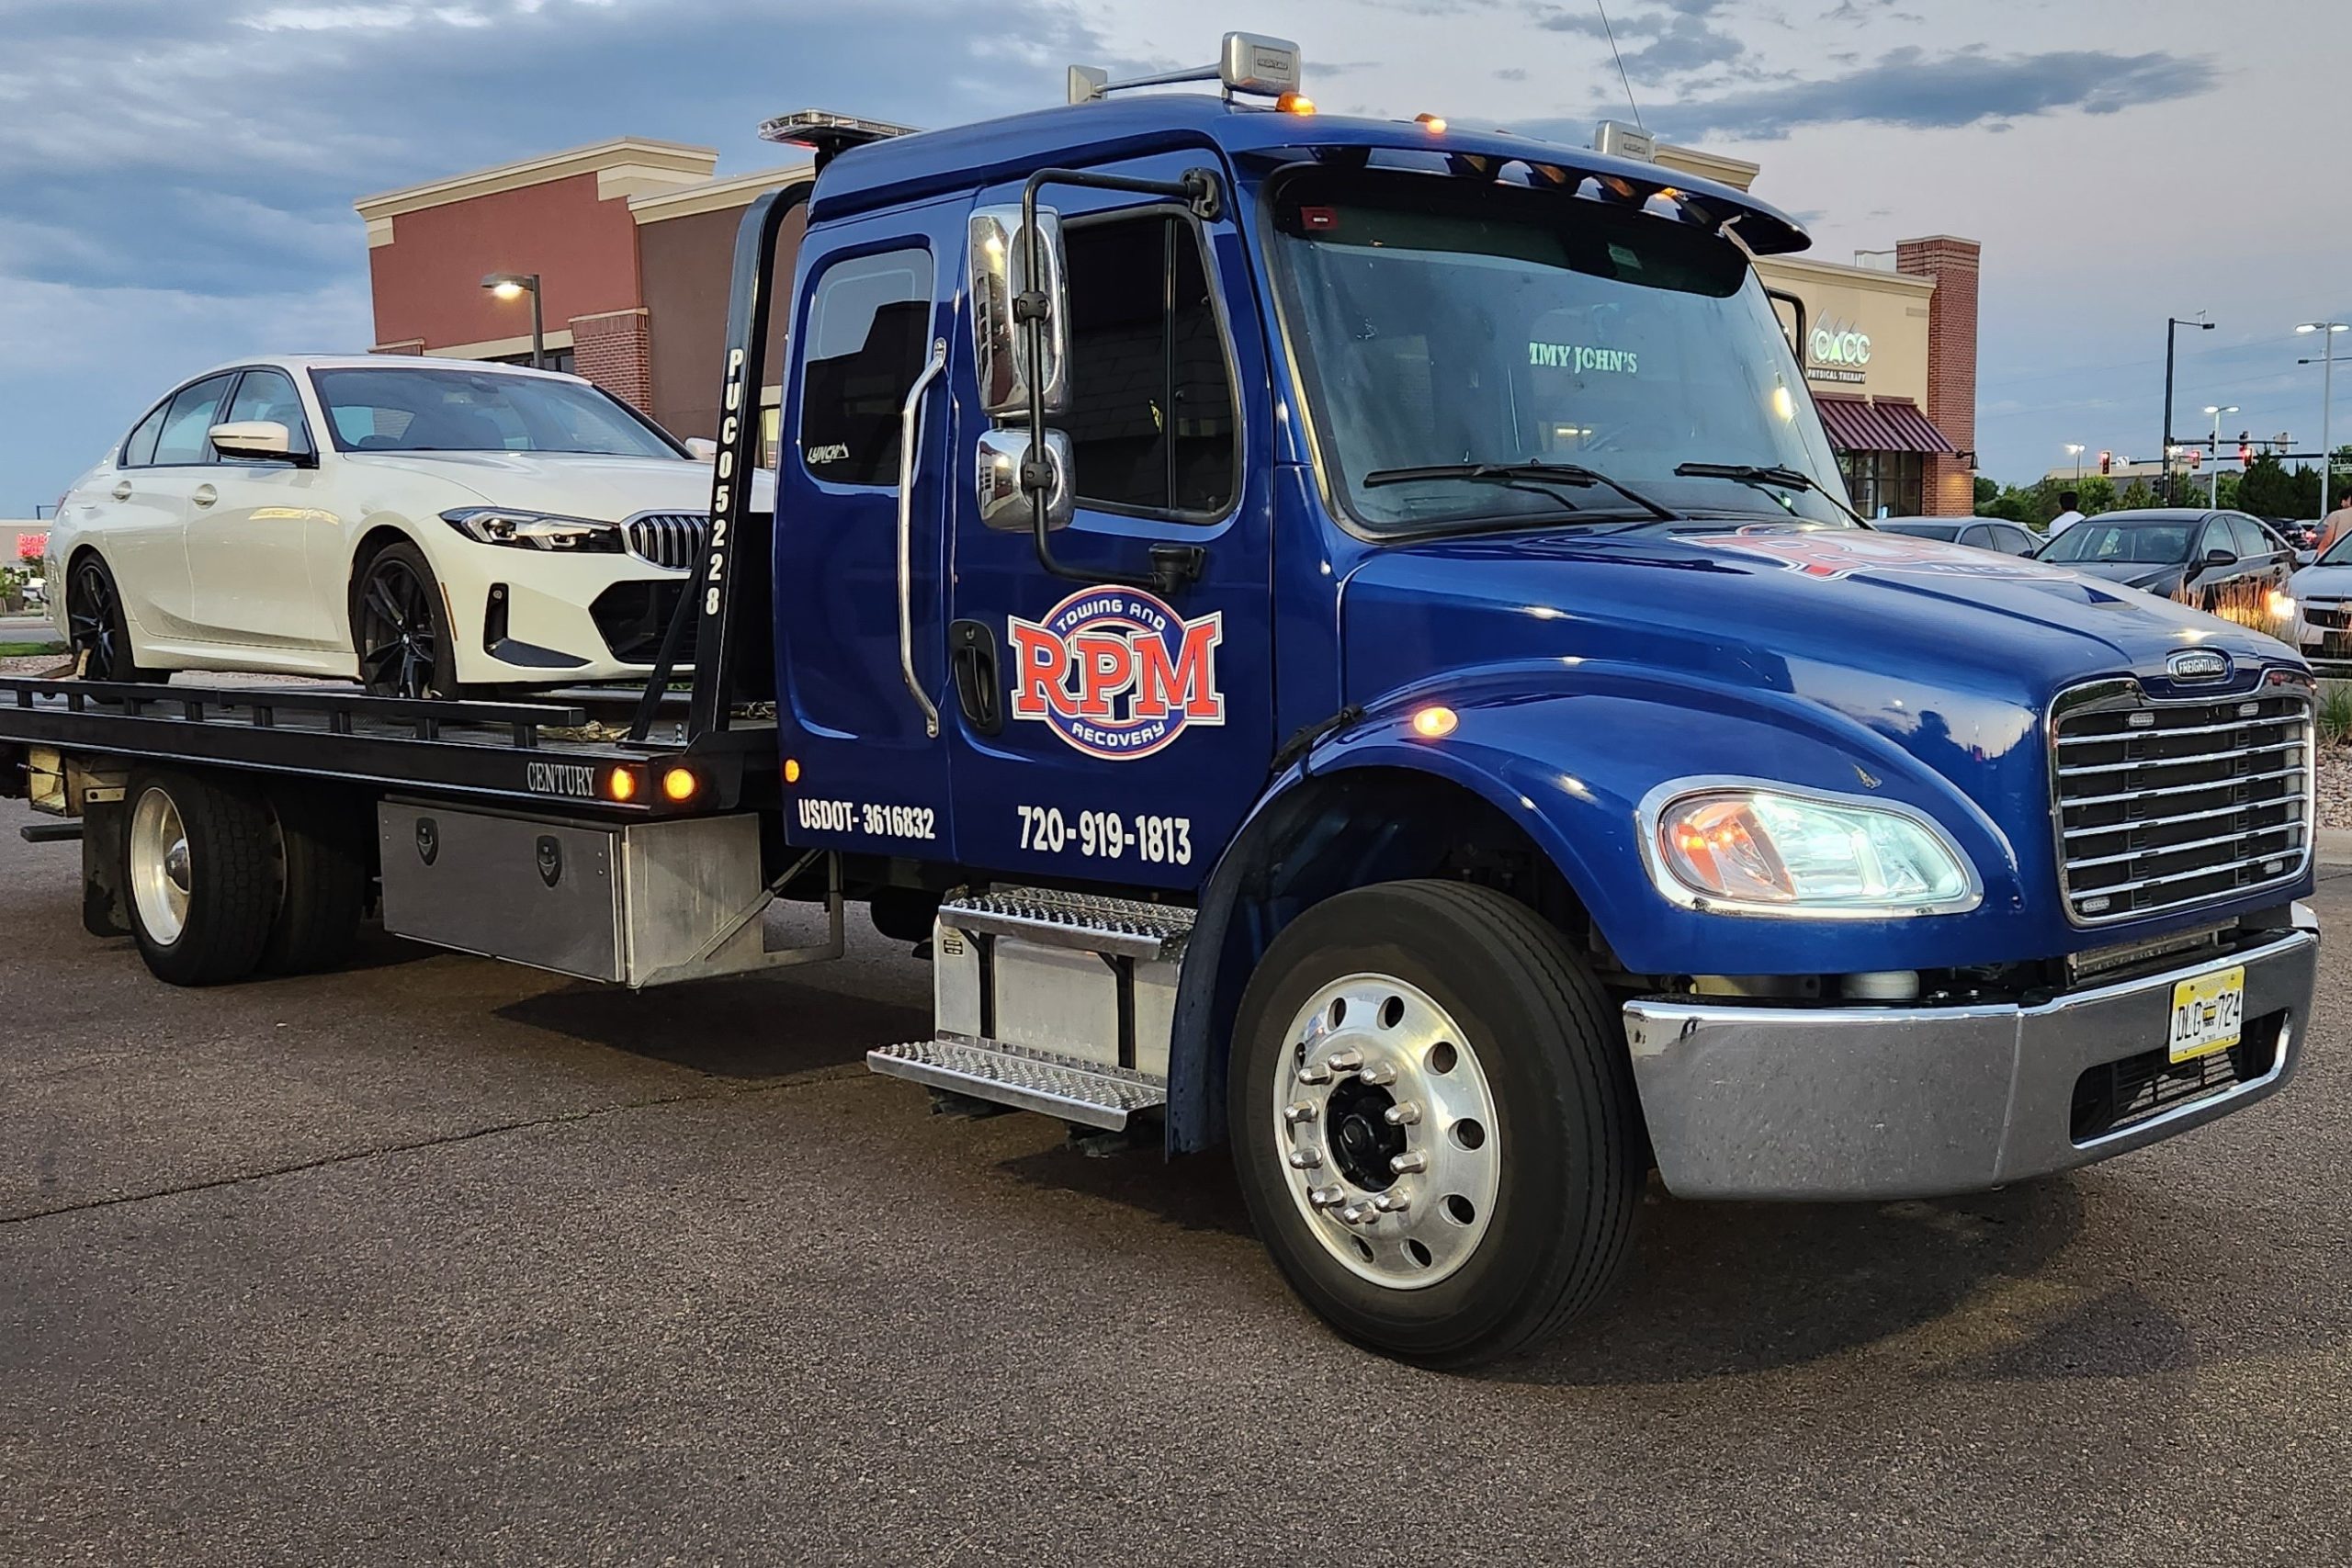 this image shows towing services in Greenwood Village, CO